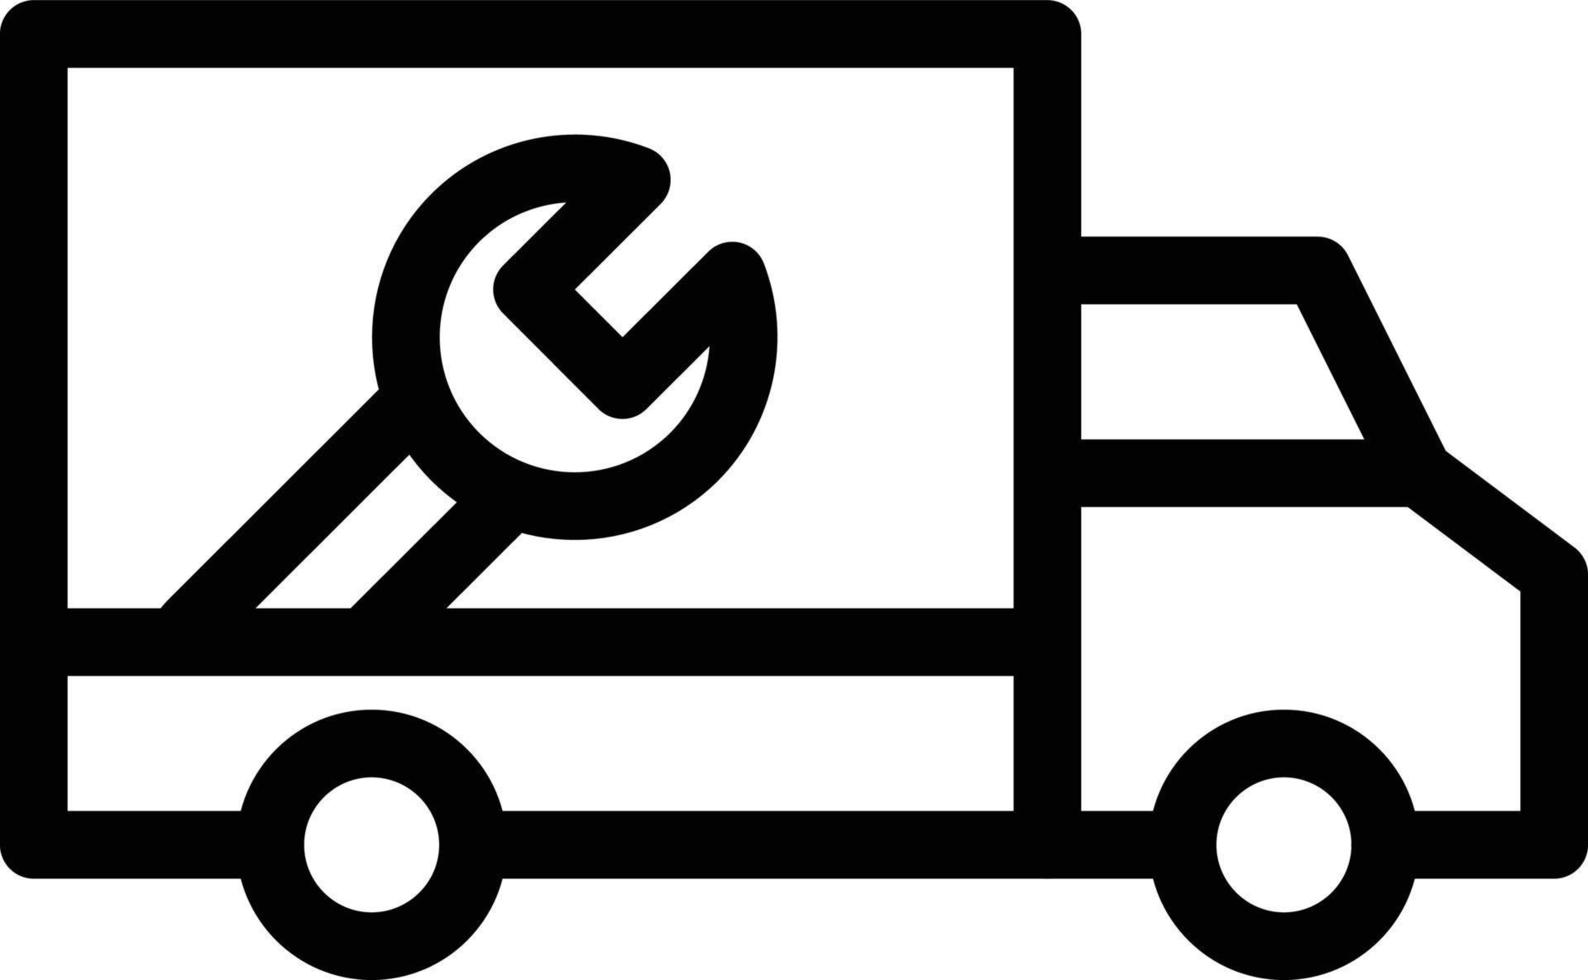 maintenance truck vector illustration on a background.Premium quality symbols.vector icons for concept and graphic design.